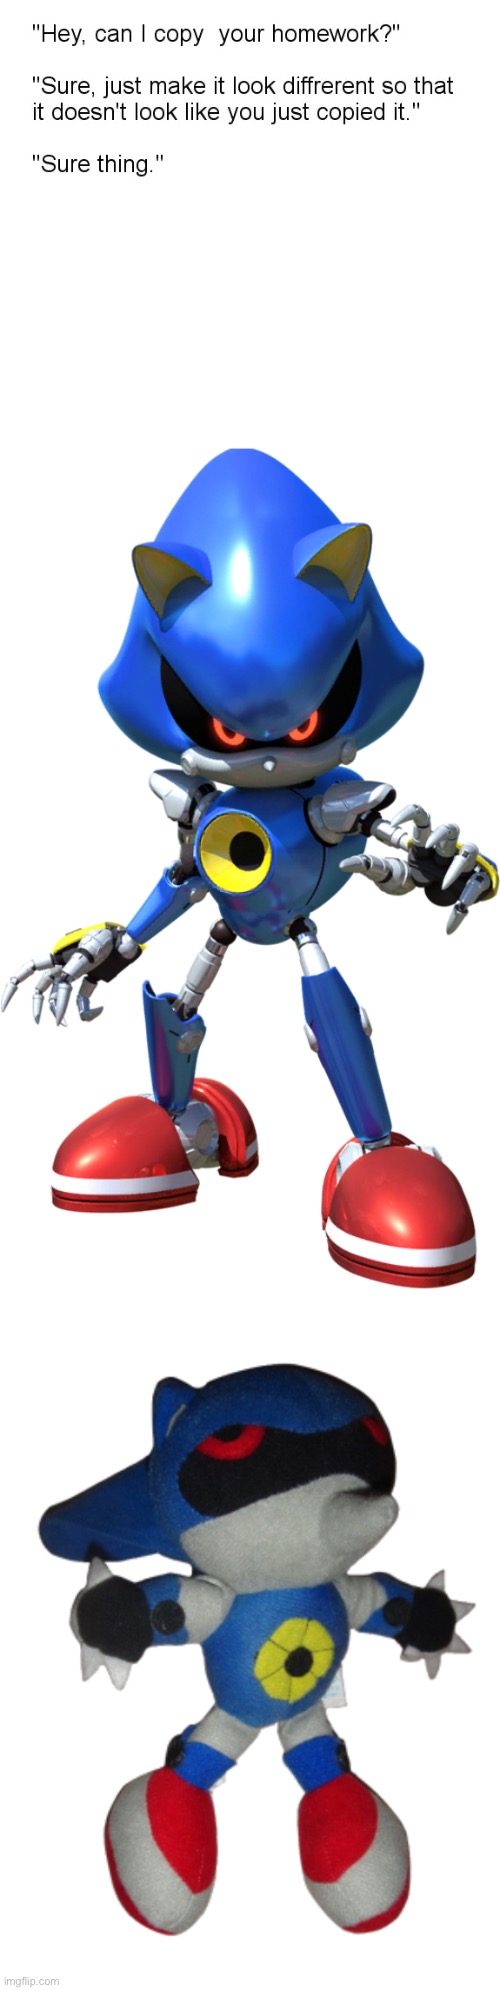 Faker | image tagged in hey can i copy your homework,metal sonic,metal sonic bootleg | made w/ Imgflip meme maker